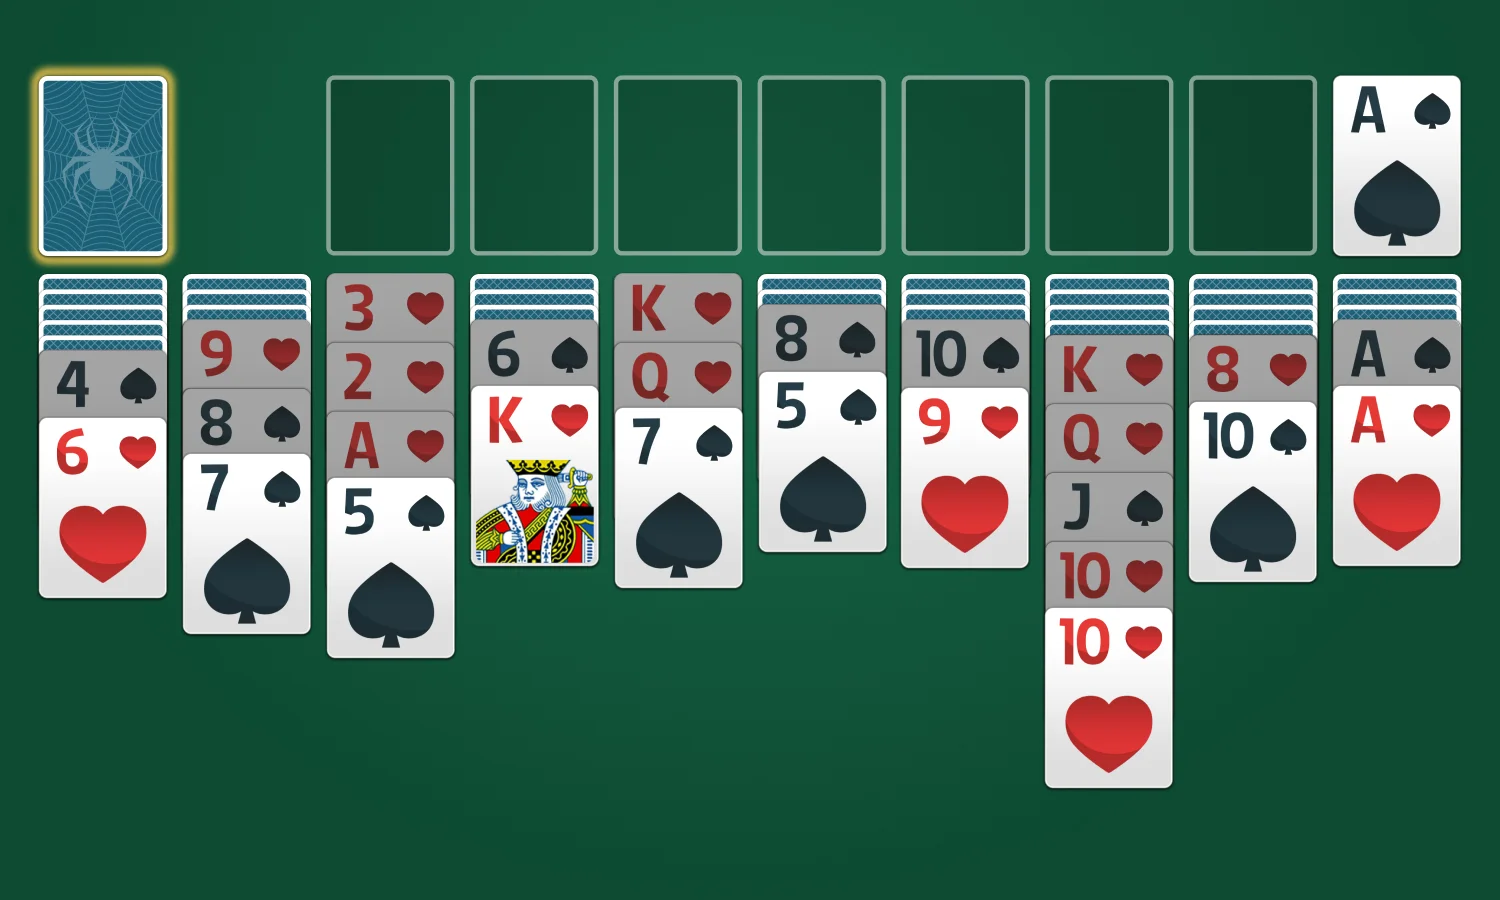 Spider Solitaire Rules: Use the Stockpile